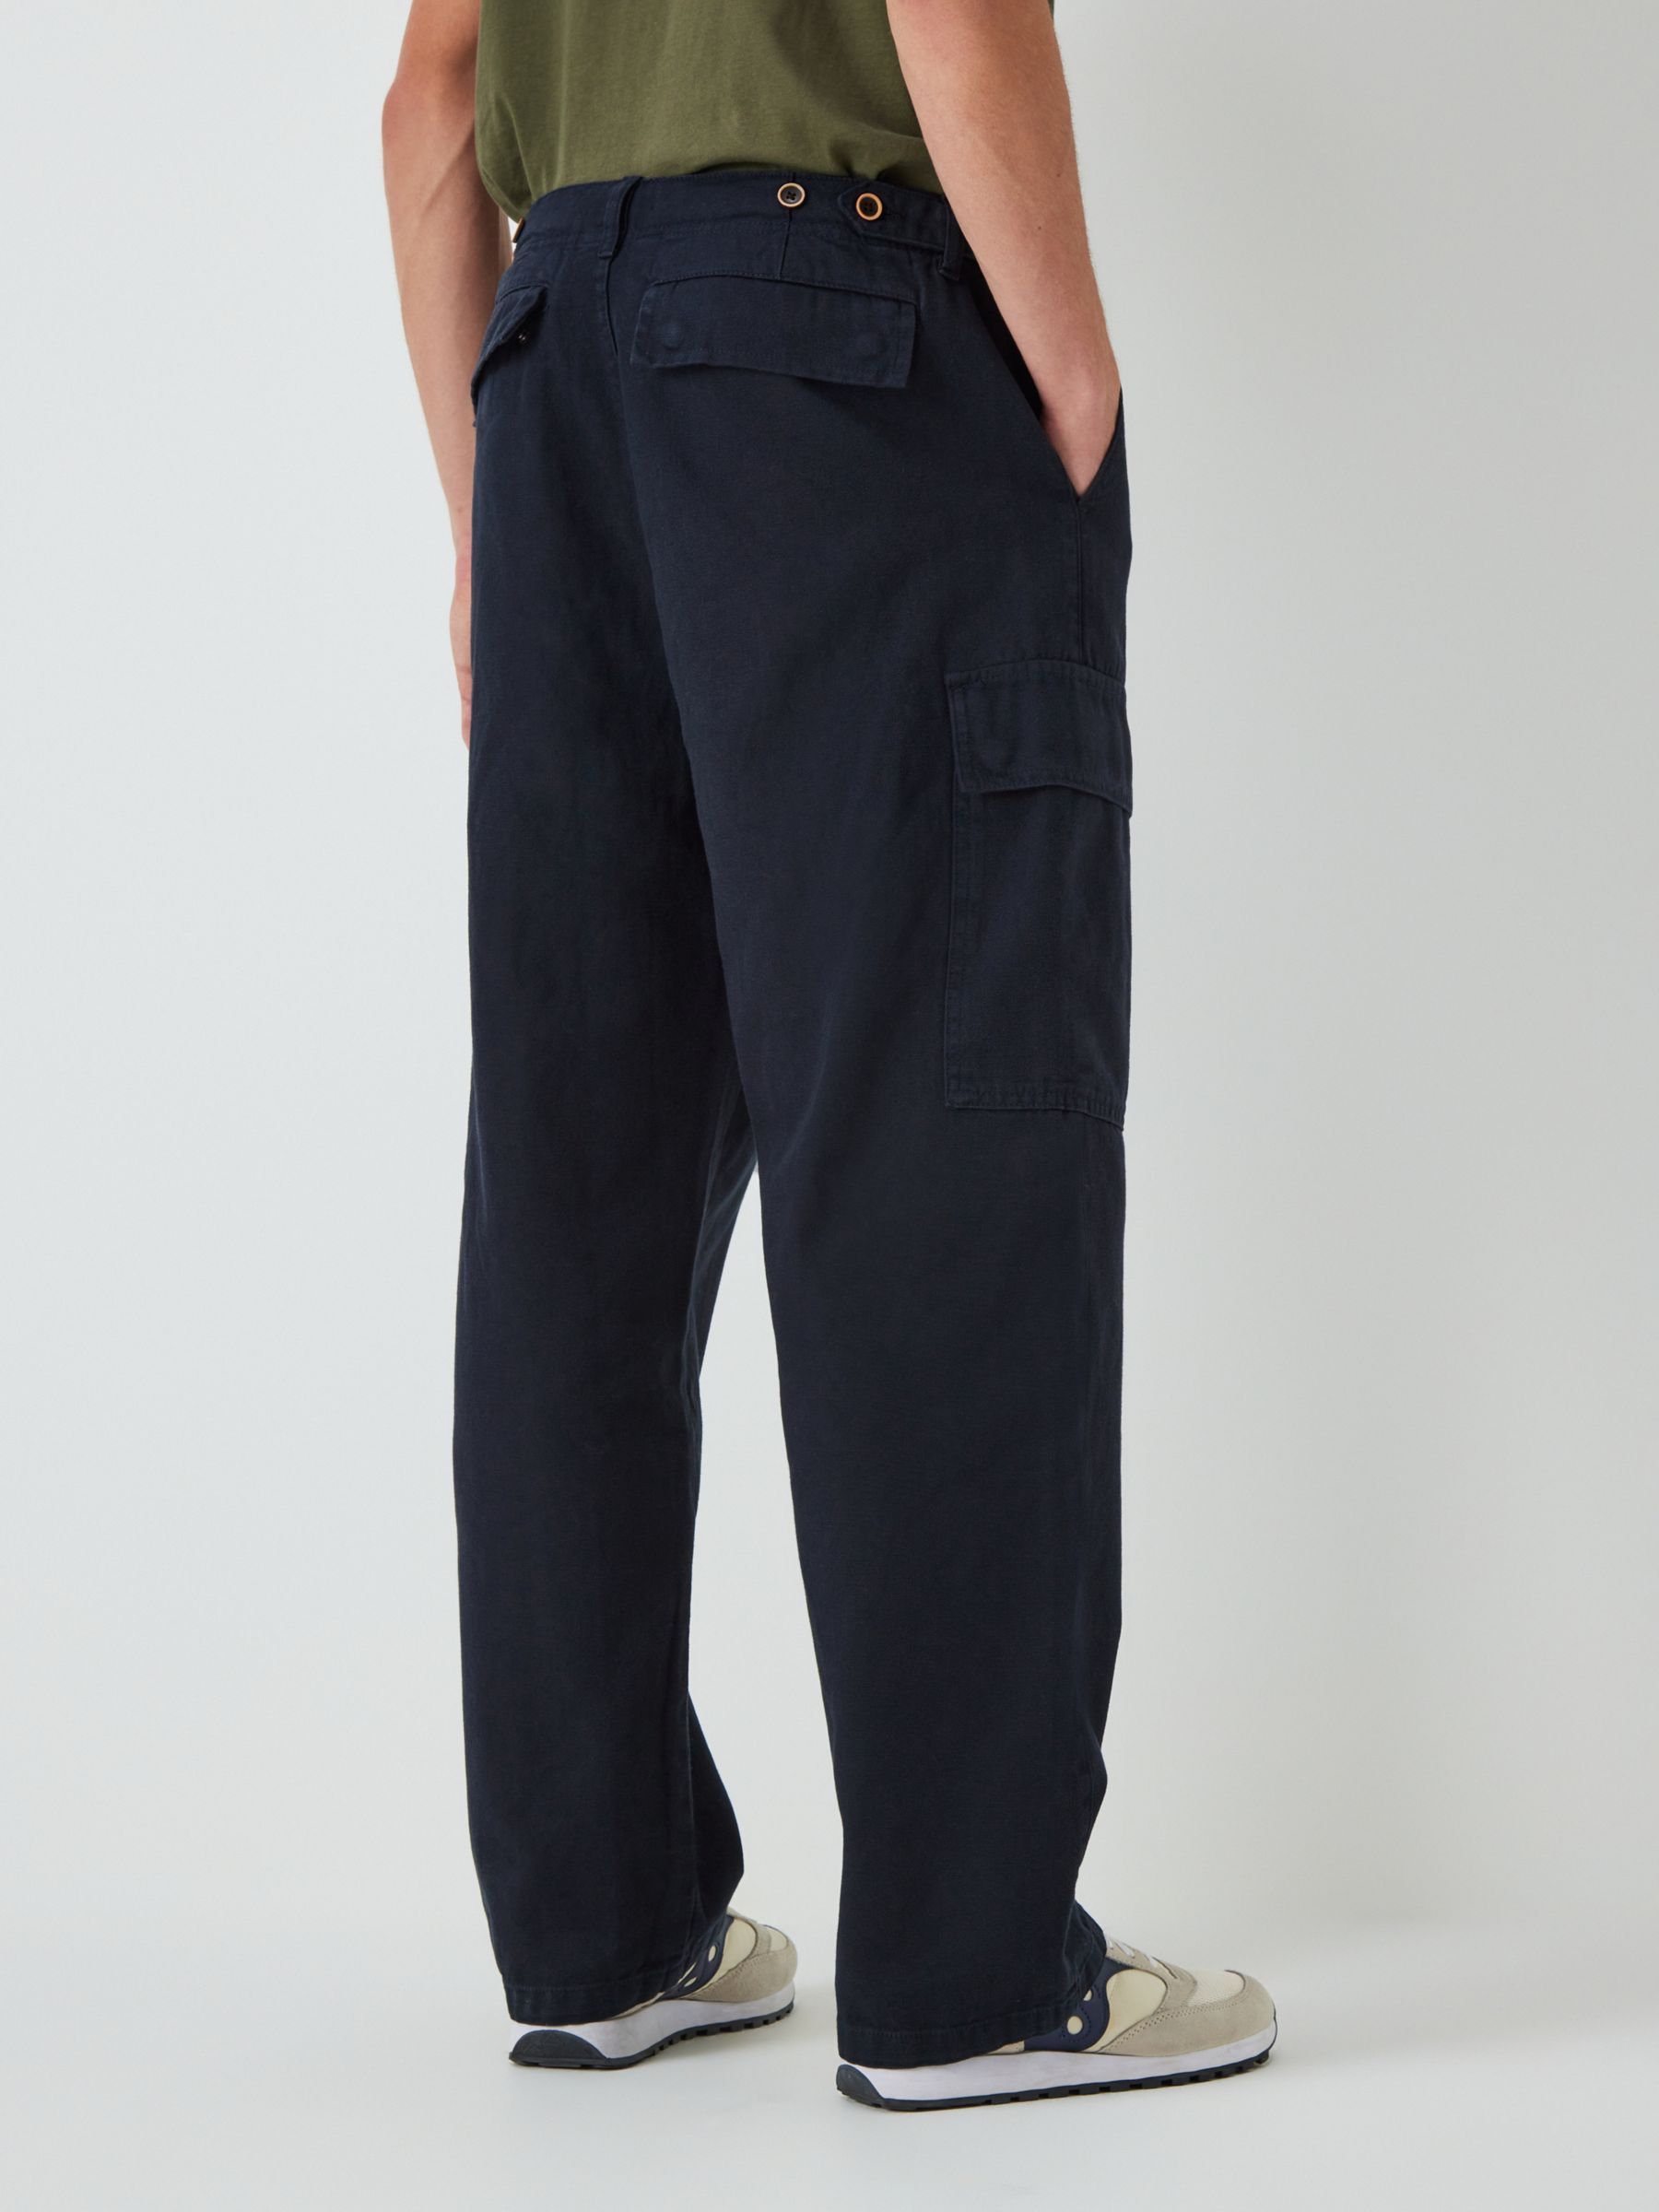 Armor Lux Heritage Pantalon Canvas Trousers, Navy at John Lewis & Partners